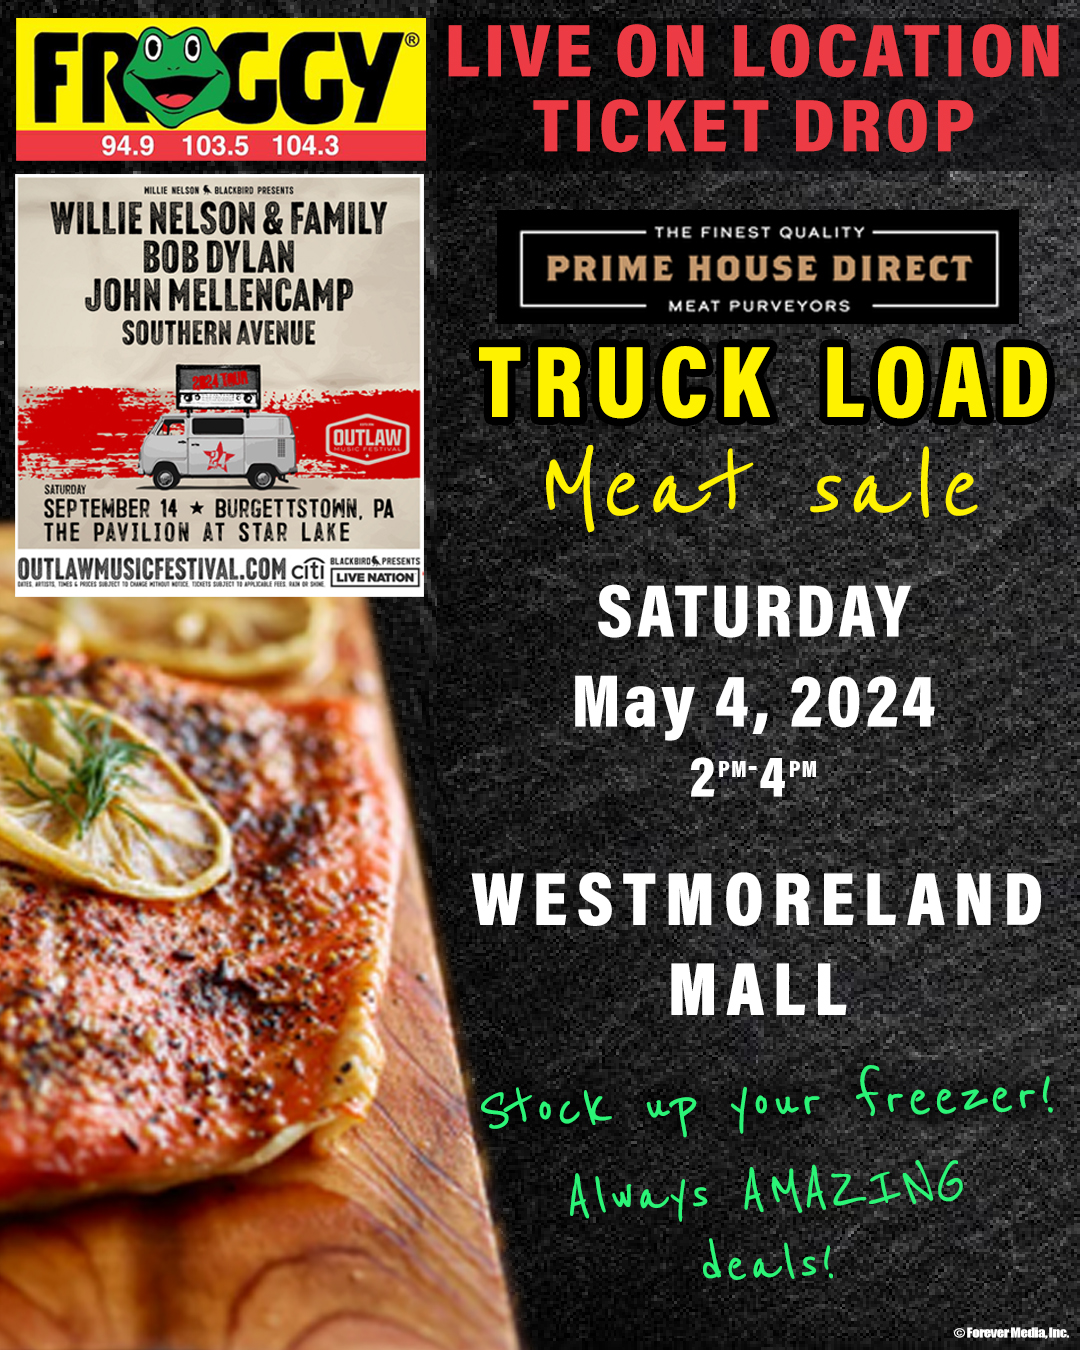 Truckload Meat Sale @ Westmoreland Mall